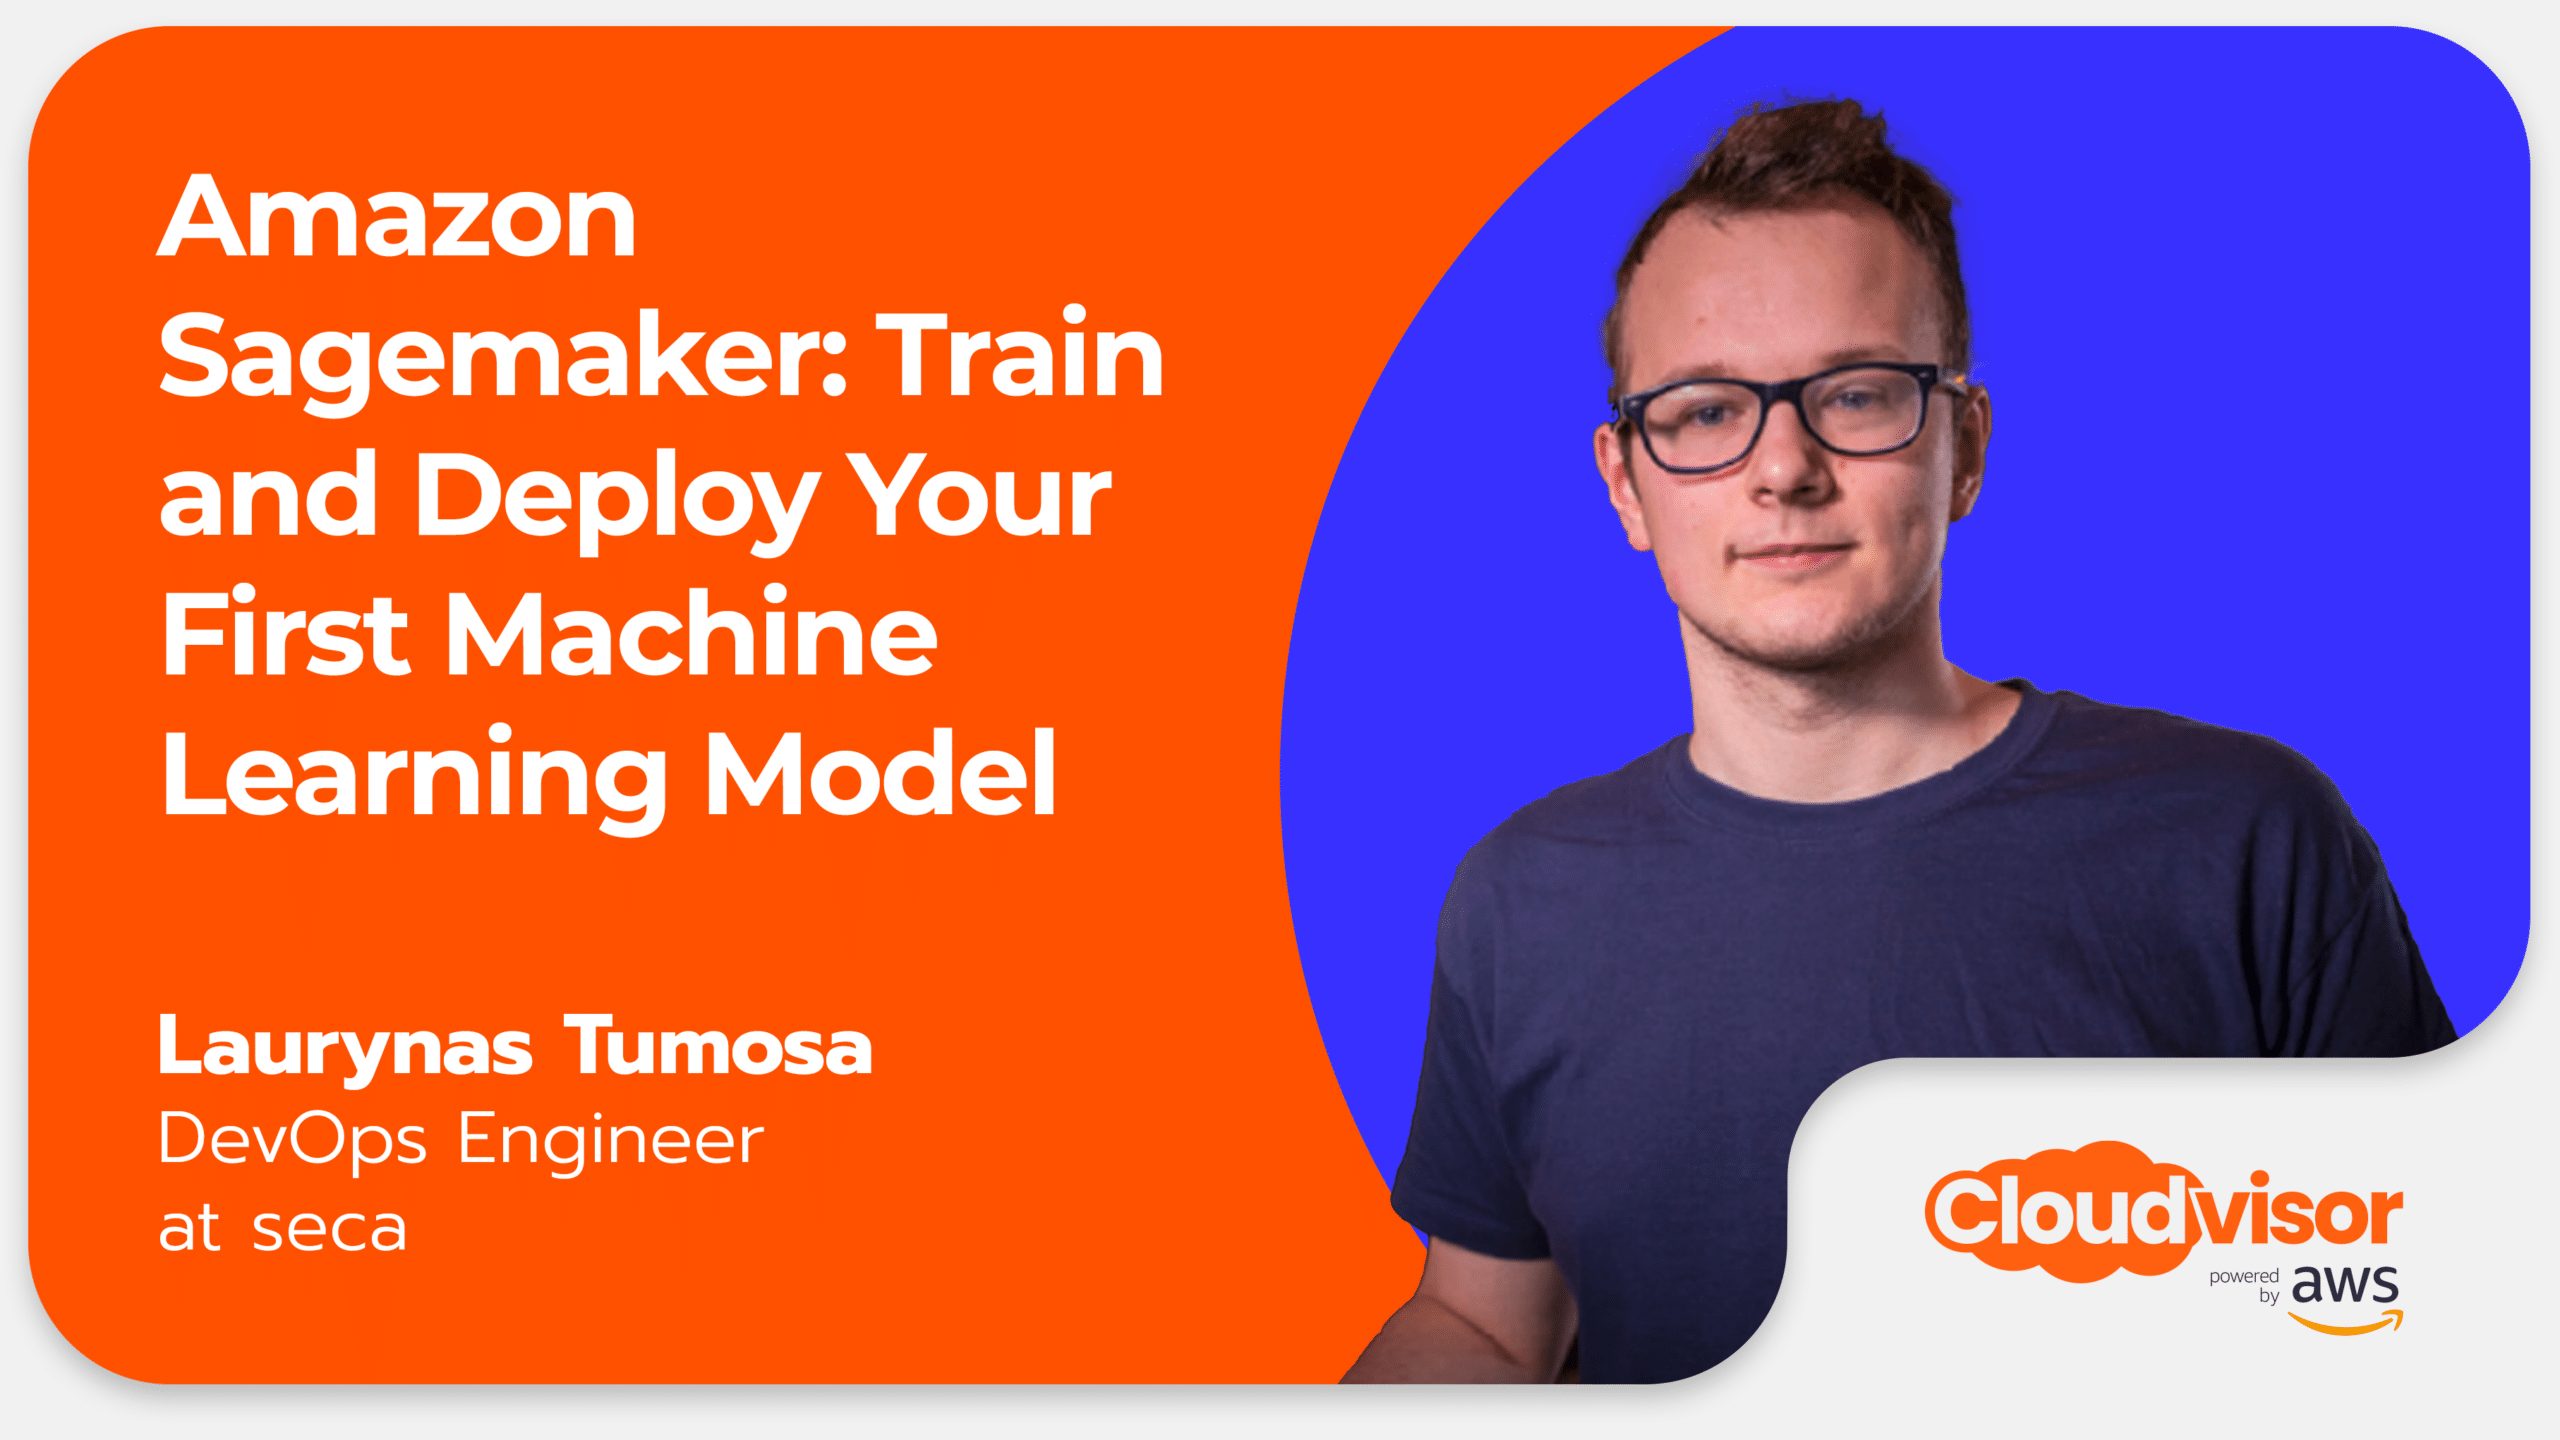 Amazon SageMaker: Train and Deploy your First Machine Learning Model